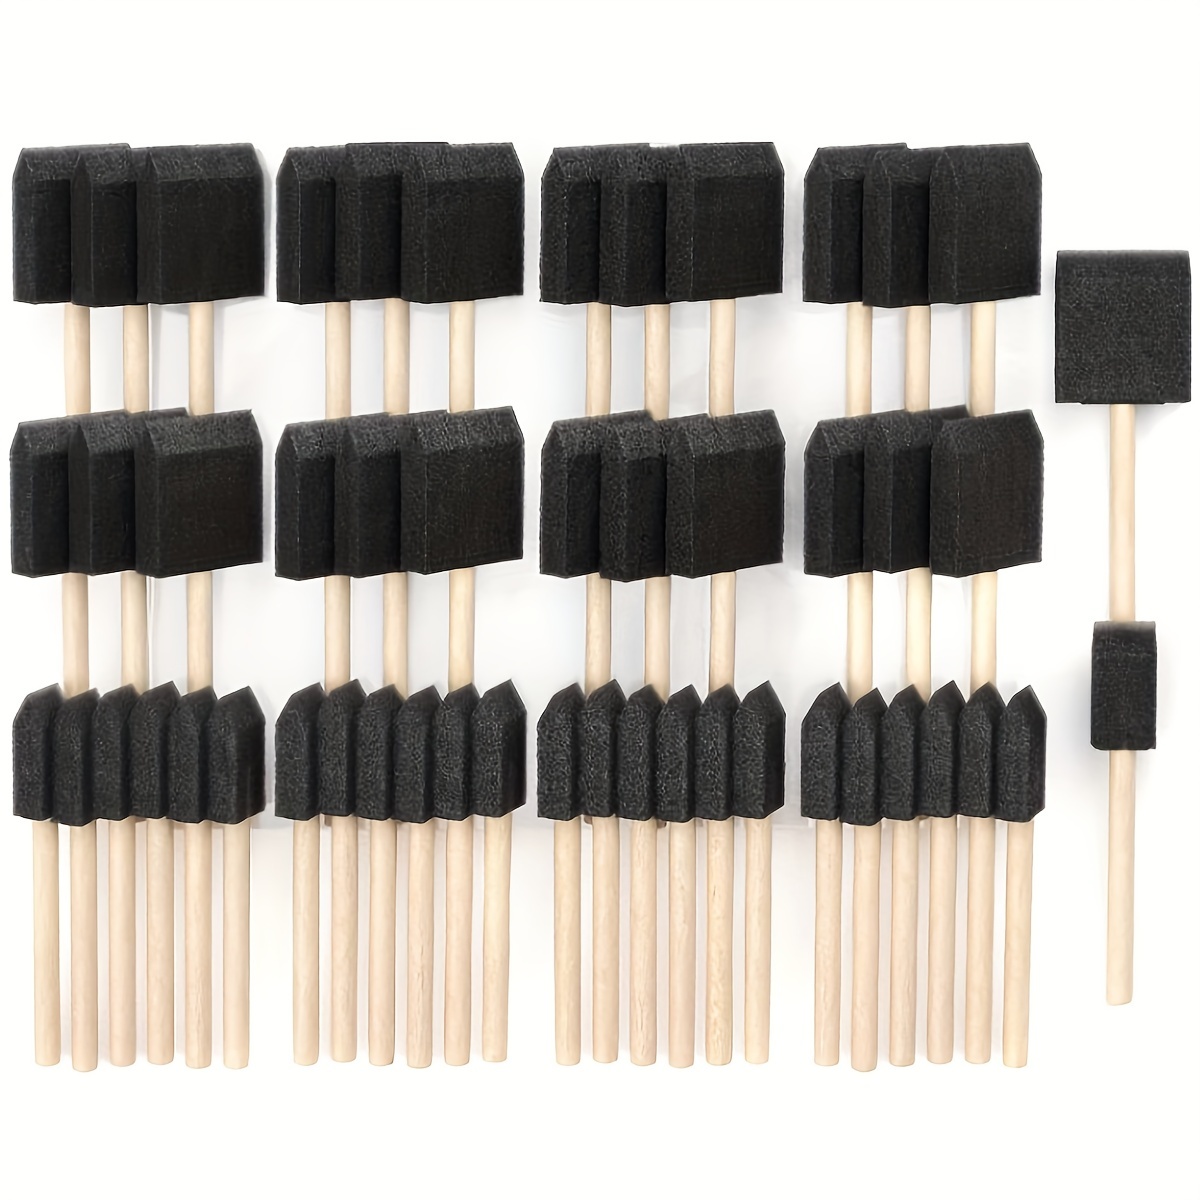 Foam Sponge Brushes Set Penta Angel 8Pcs Multi Size Round Painting Sponges  Tools with Wood Handle for Acrylic Stains Watercolor Varnishes and Crafts